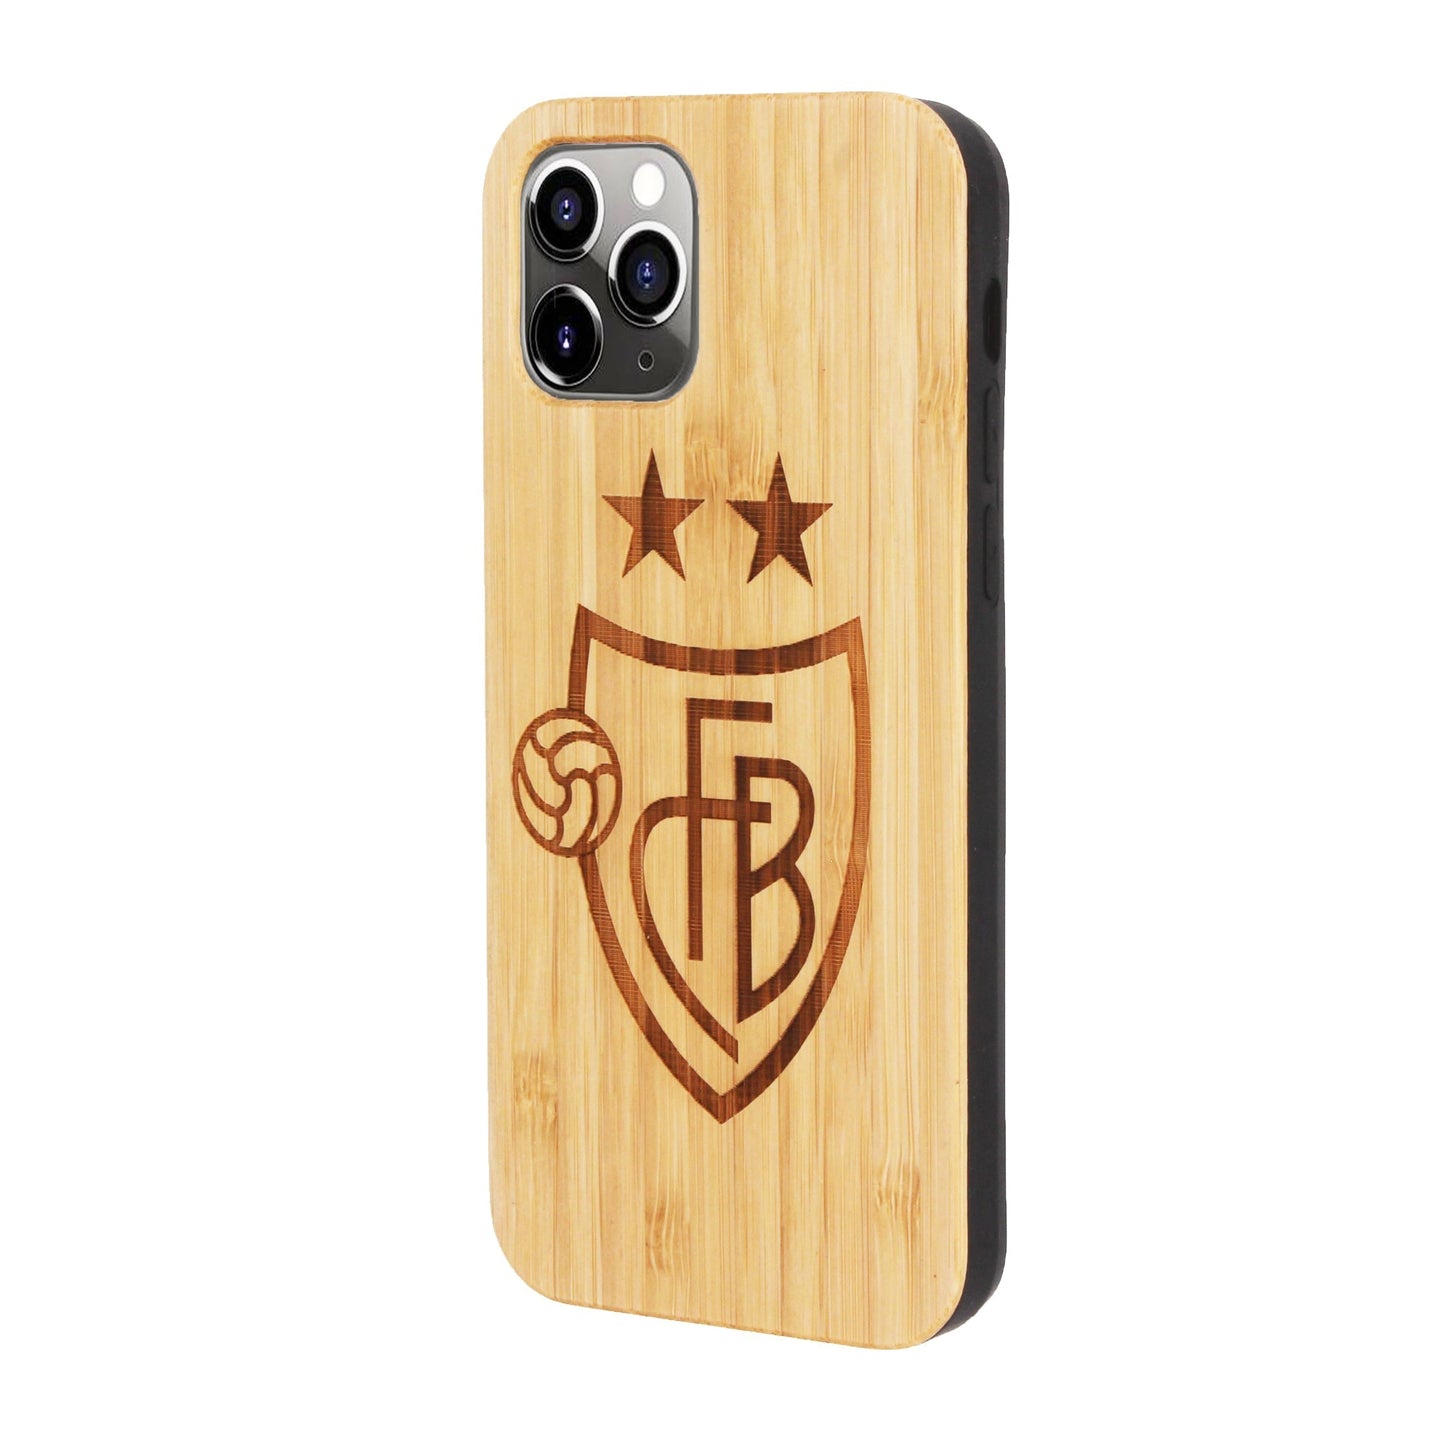 FCB Eden Bamboo Case for iPhone 11 Pro Max